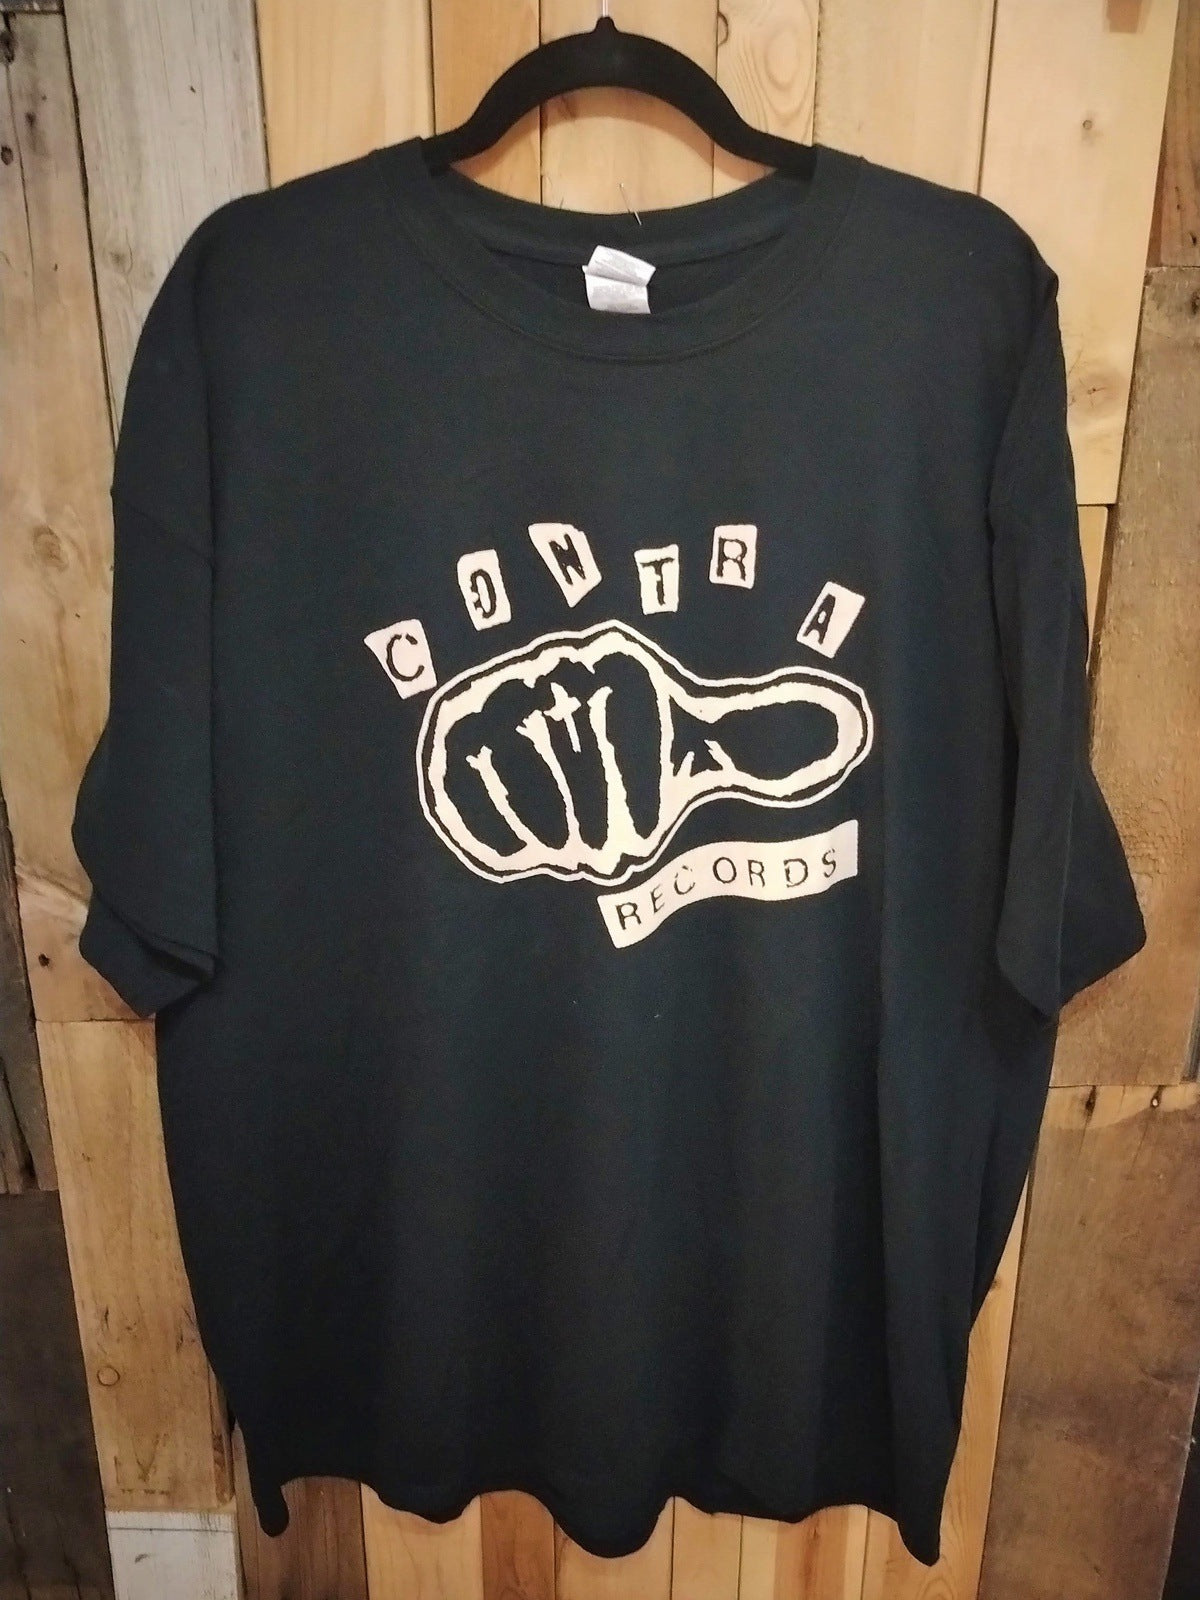 Contra Records T Shirt Size 2XL